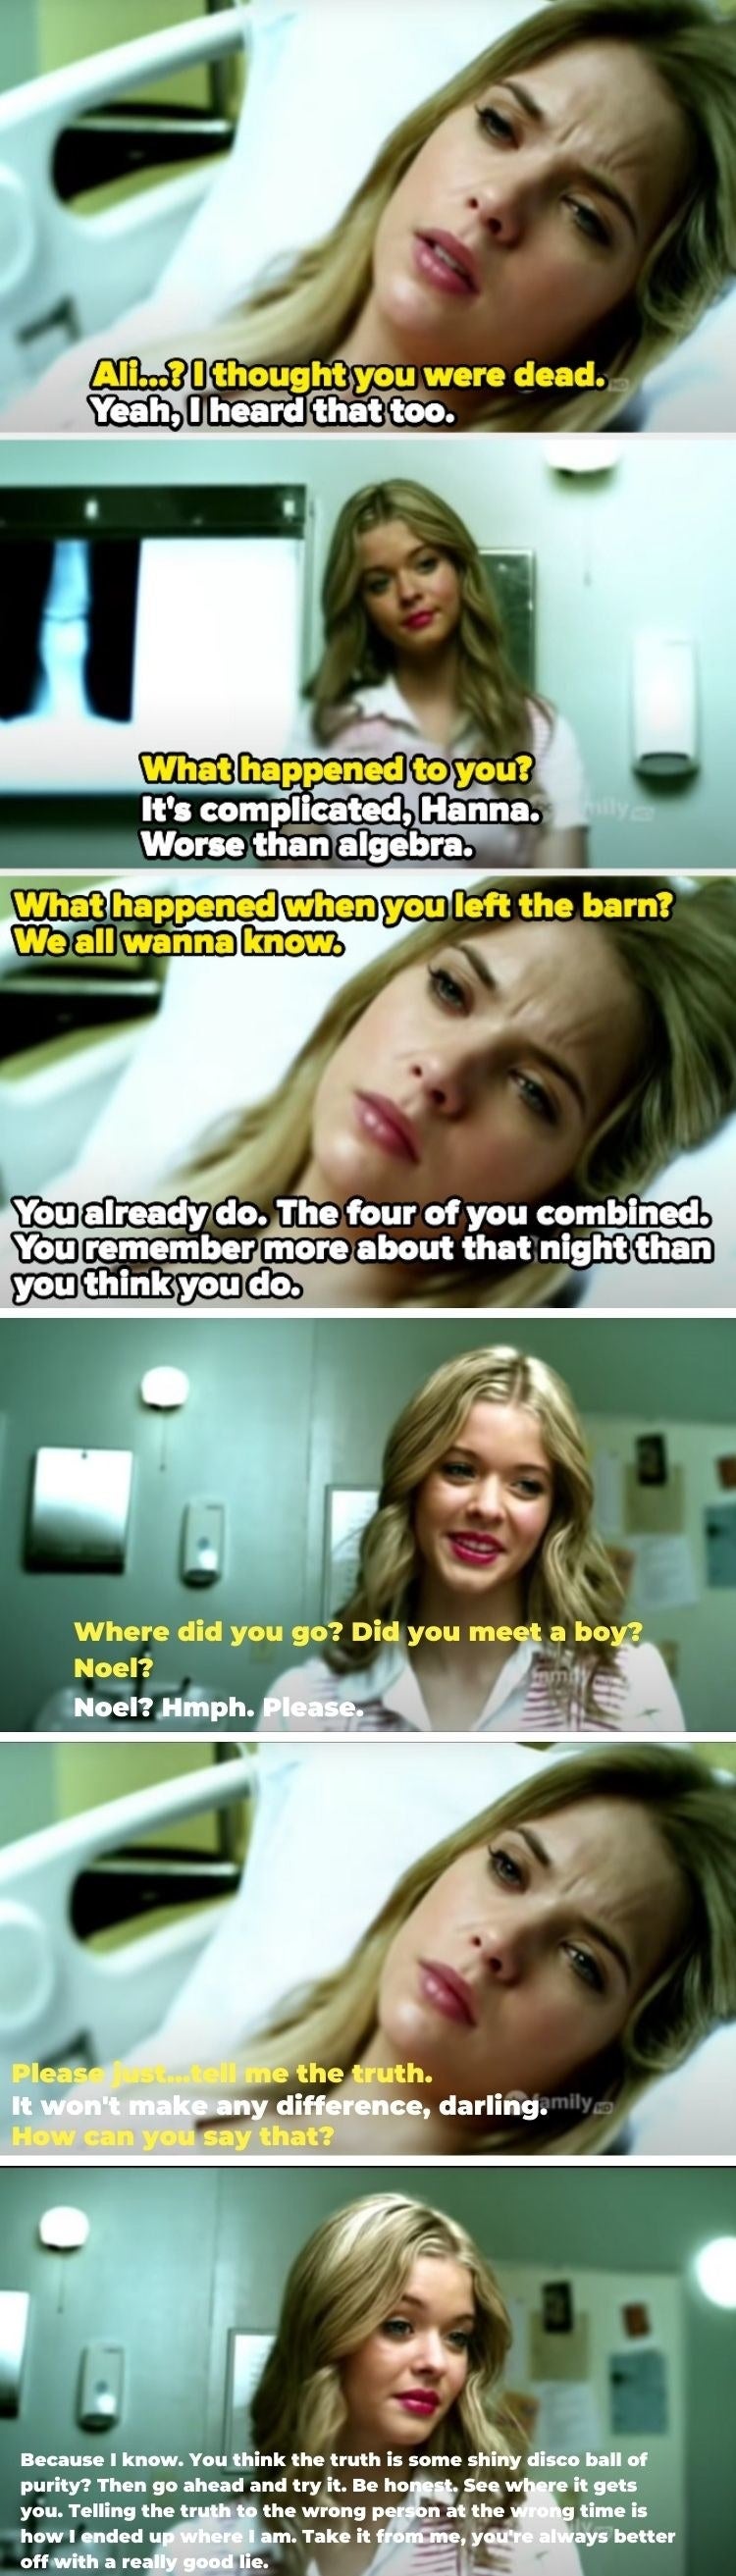 Ali visiting Hanna in the hospital to tell her that lying is sometimes better than the truth